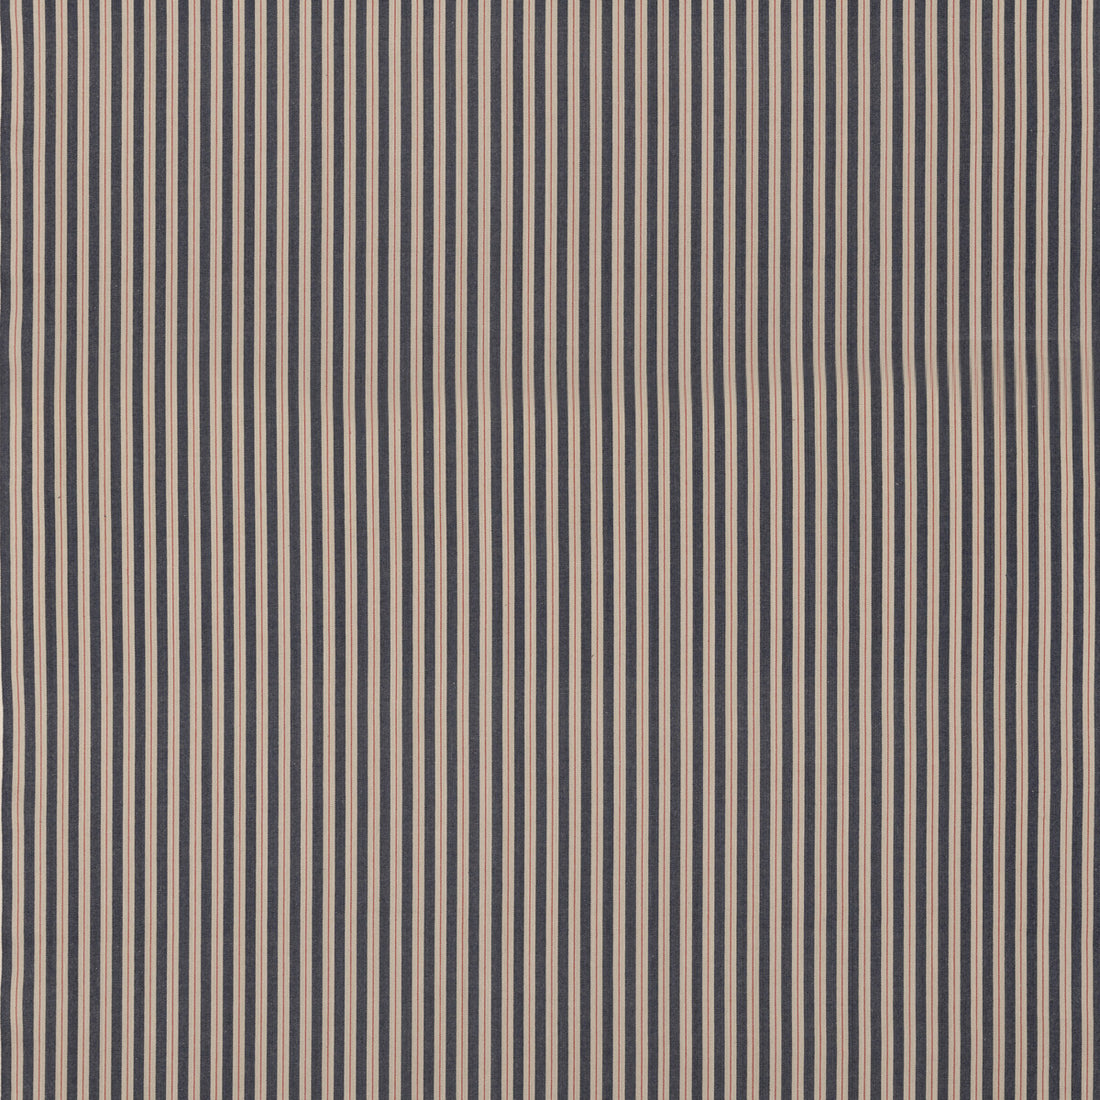 Compass Stripe fabric in indigo color - pattern FD817.H10.0 - by Mulberry in the Westerly Stripes collection